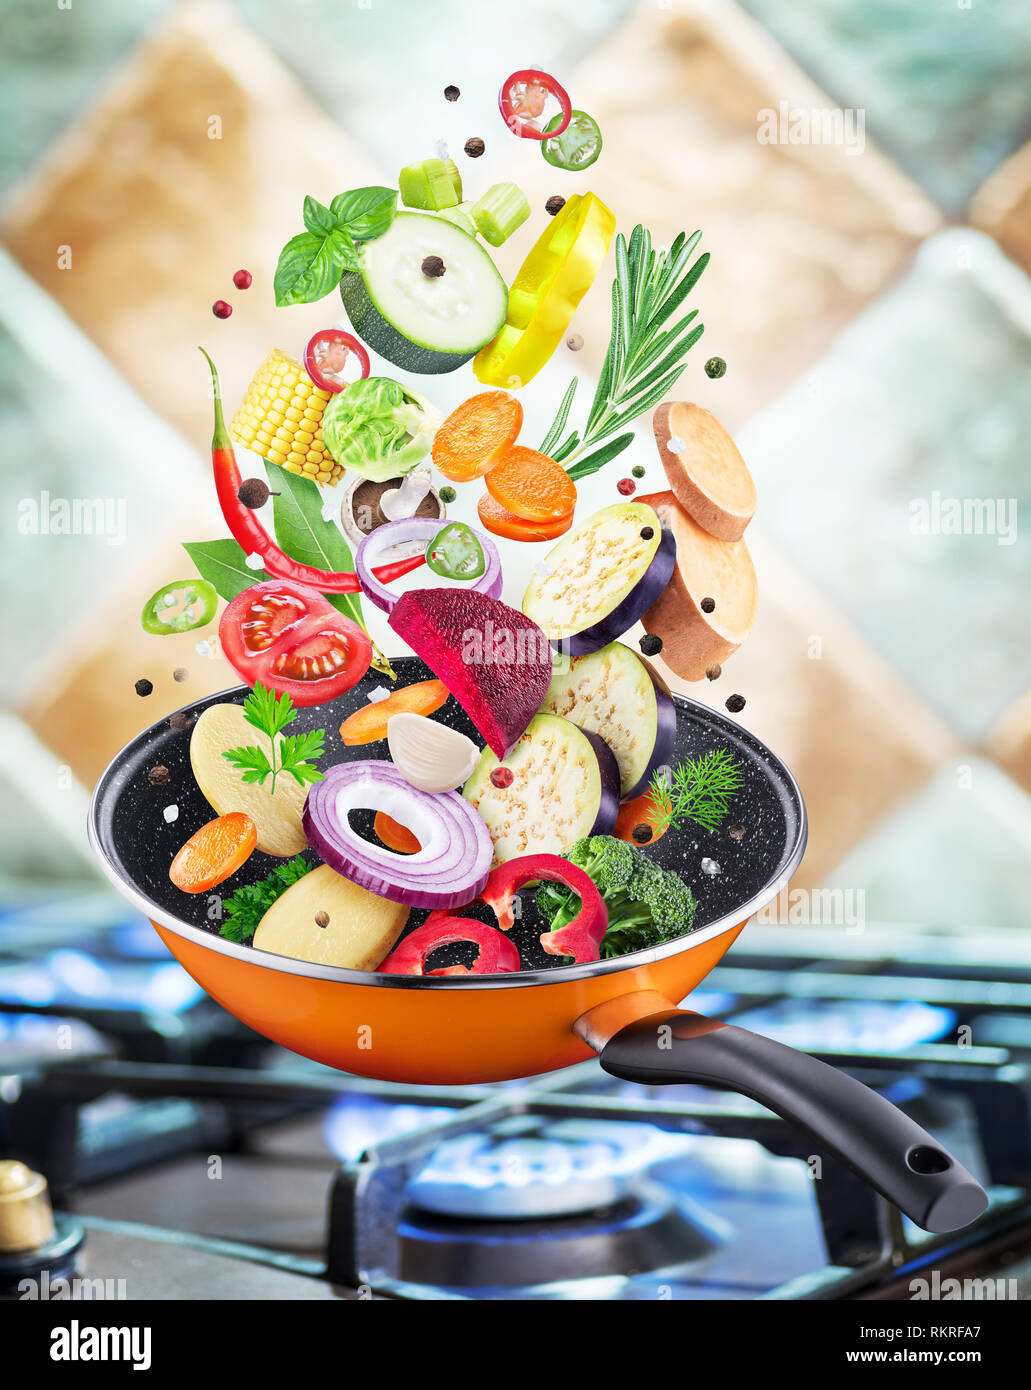 Flying fresh vegetables and spices falling into a pan. Flying motion effect.Gas-stove at the background. Stock Photo